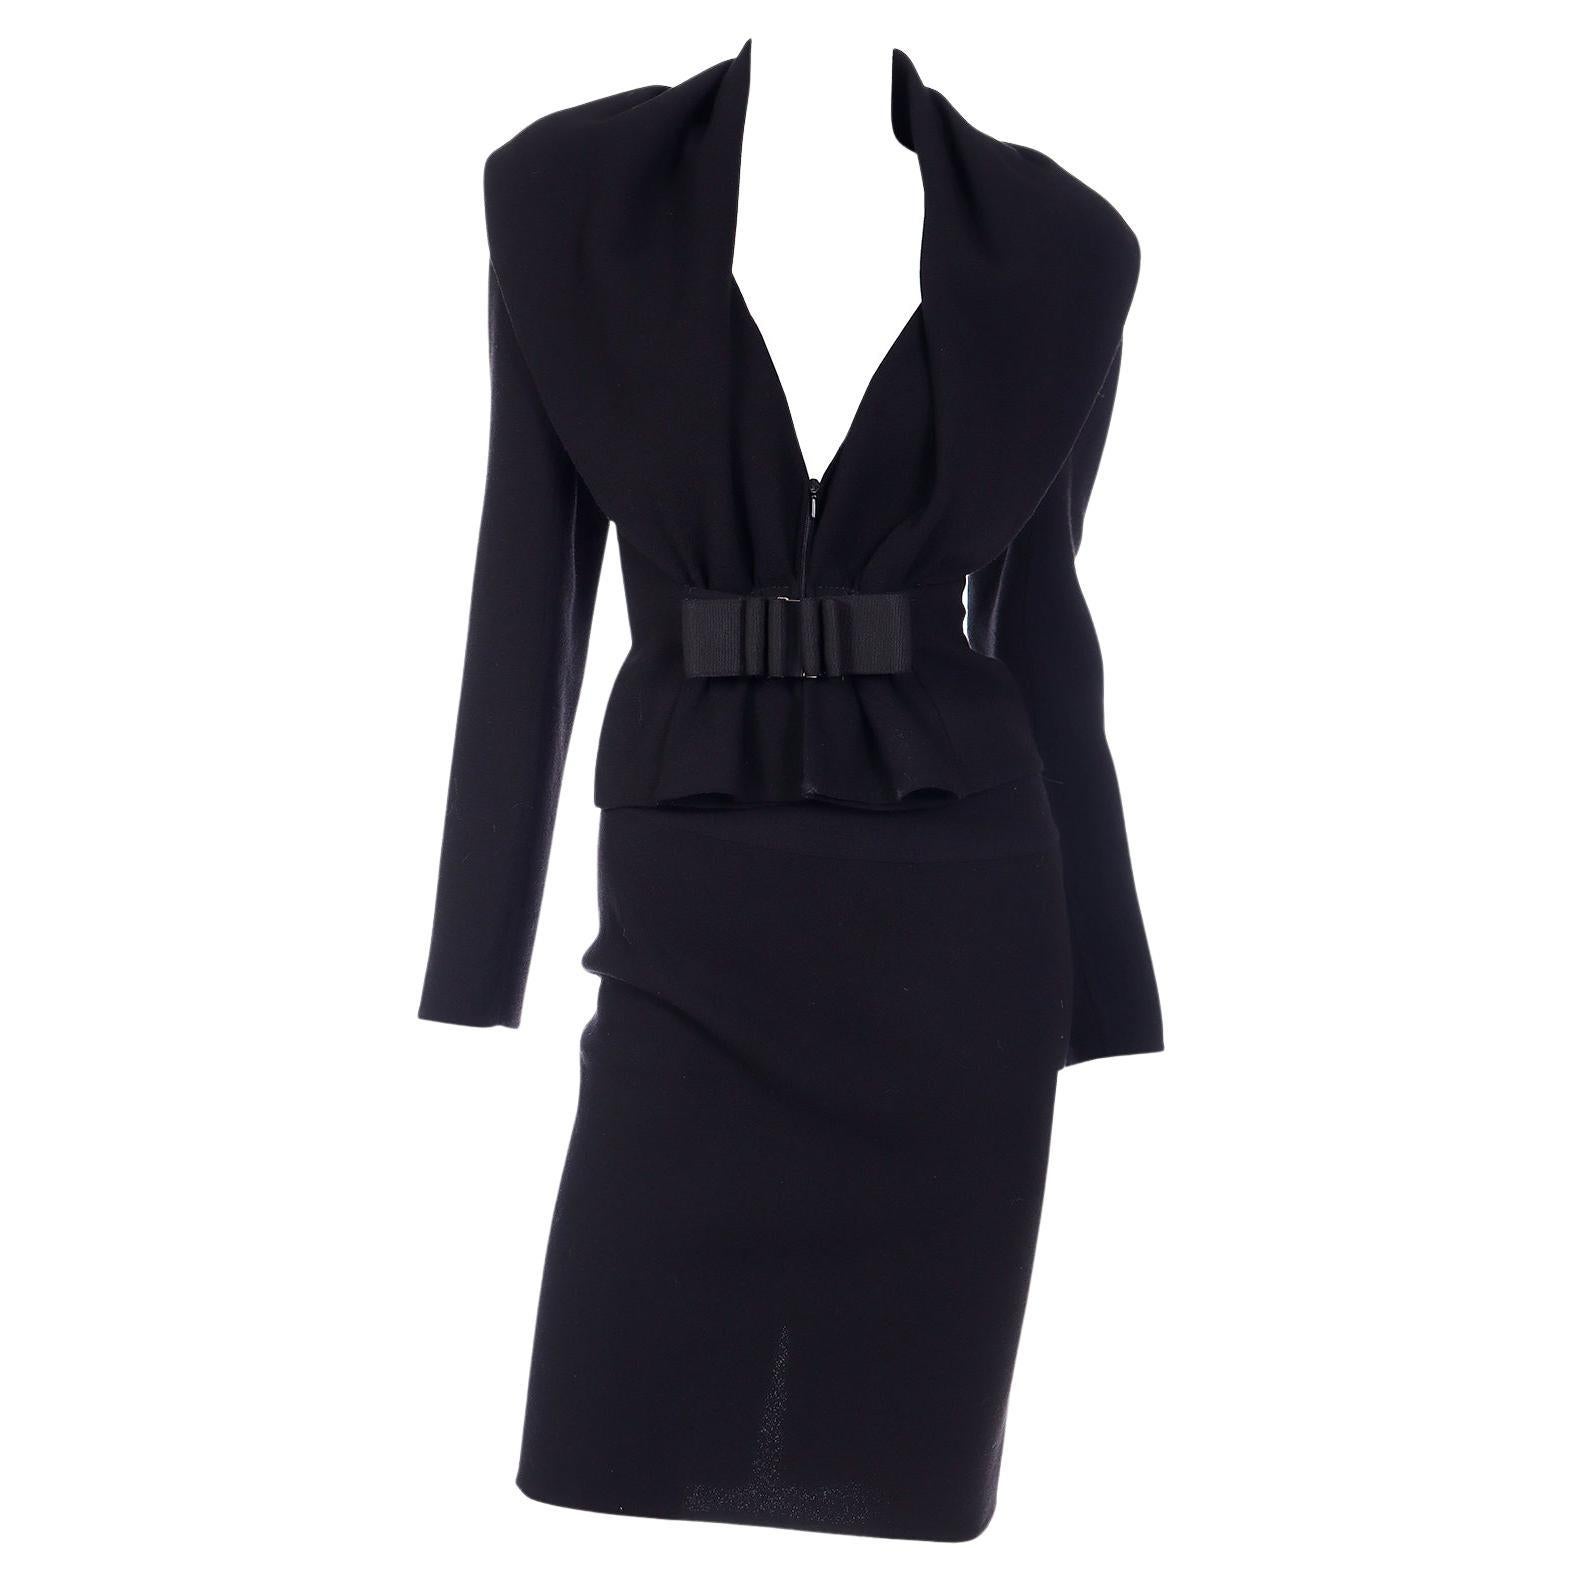 Valentino Black Skirt Suit With Unique Jacket With Bow & Buckle For Sale